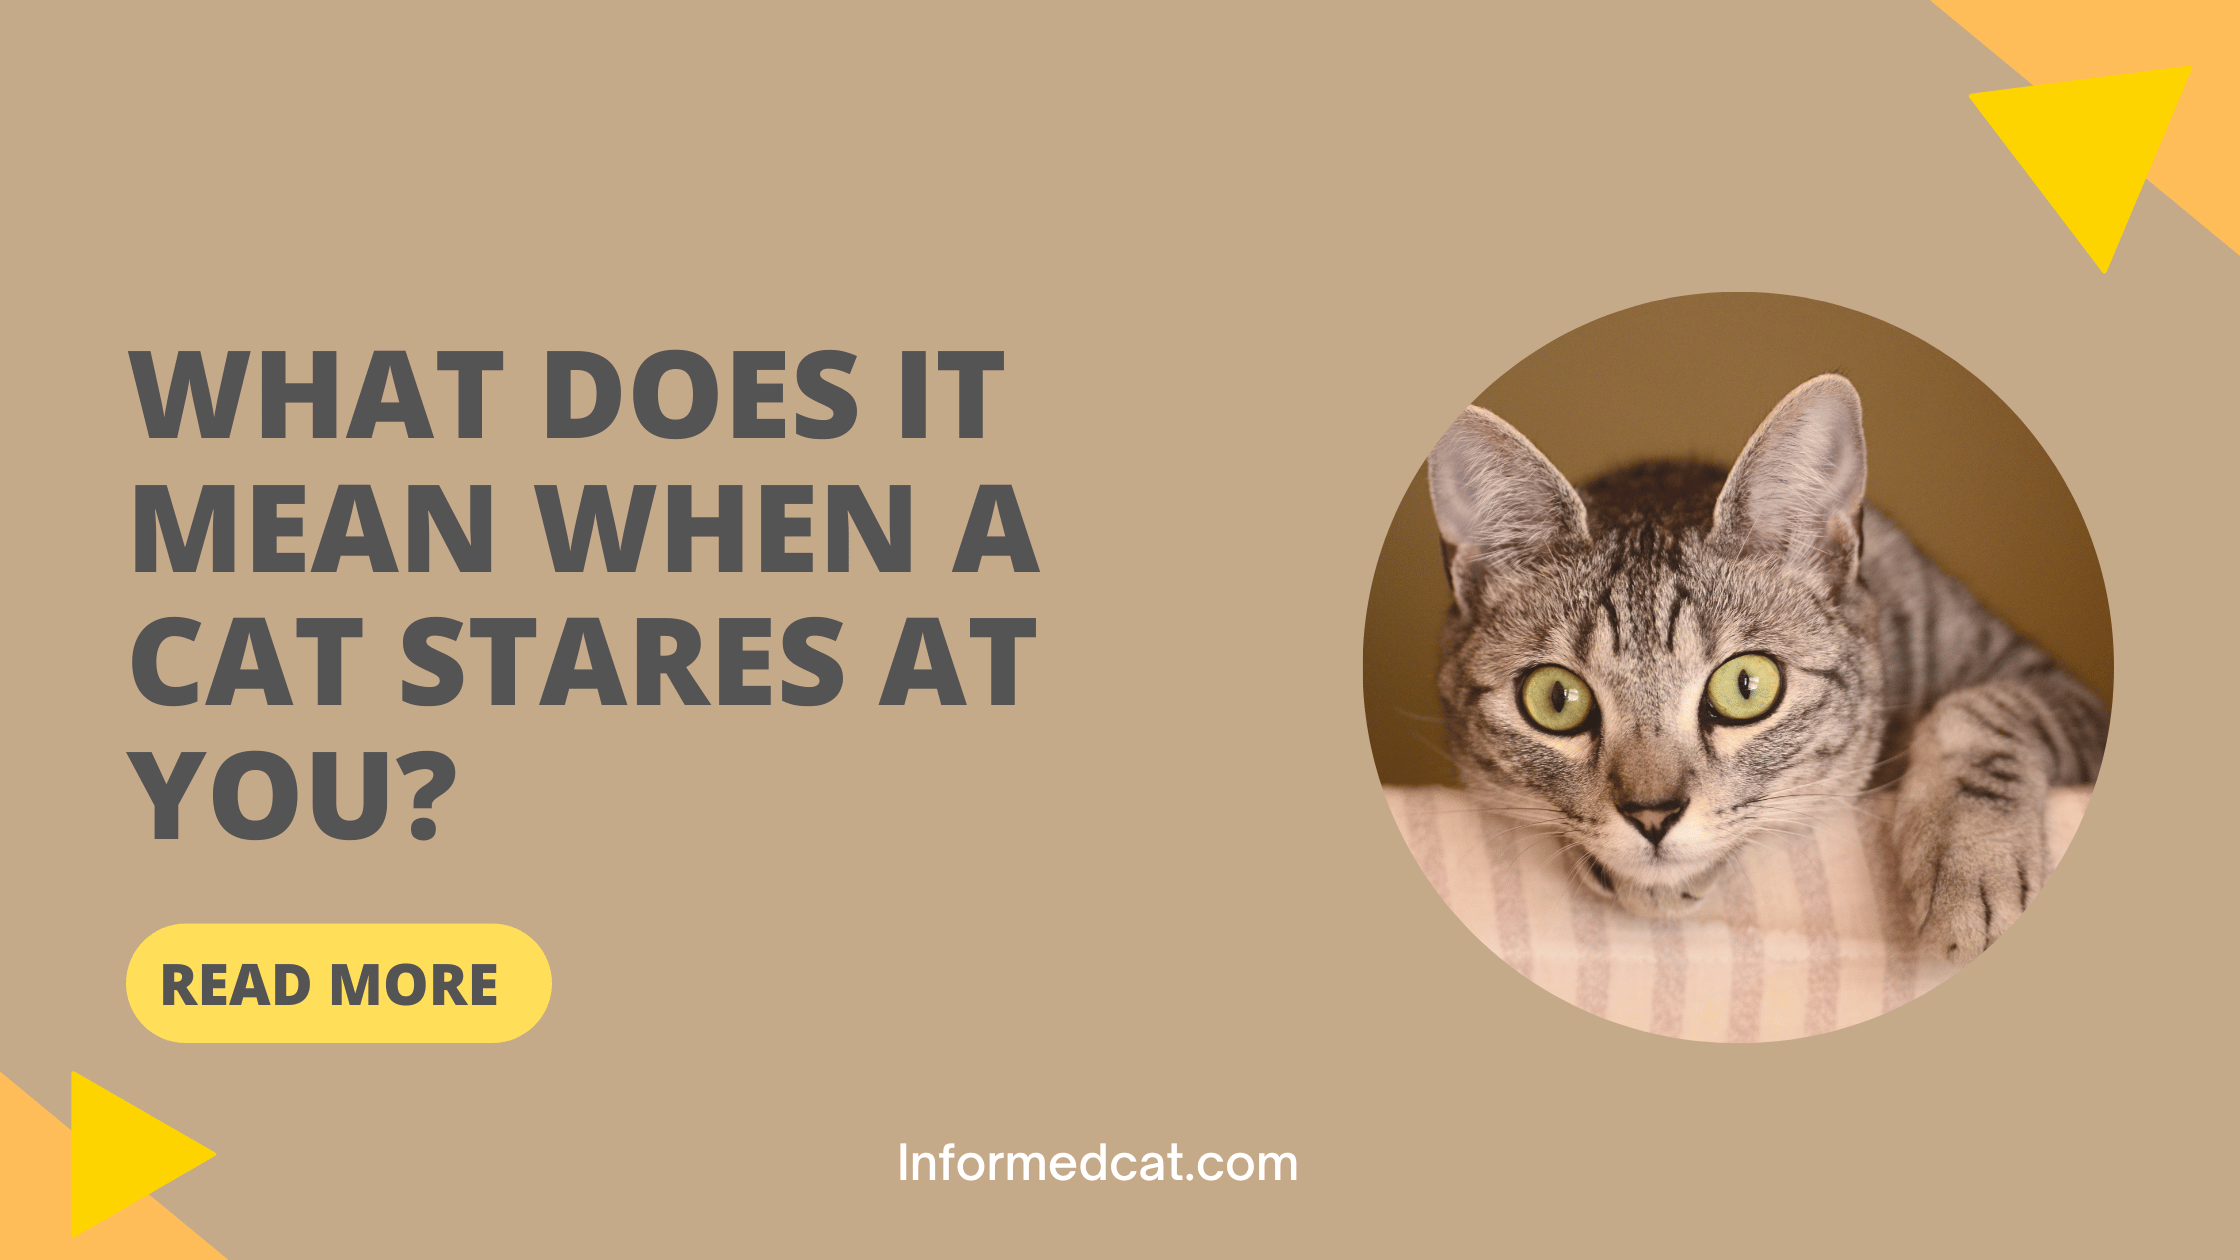 What Does it Mean When a Cat Stares at You?